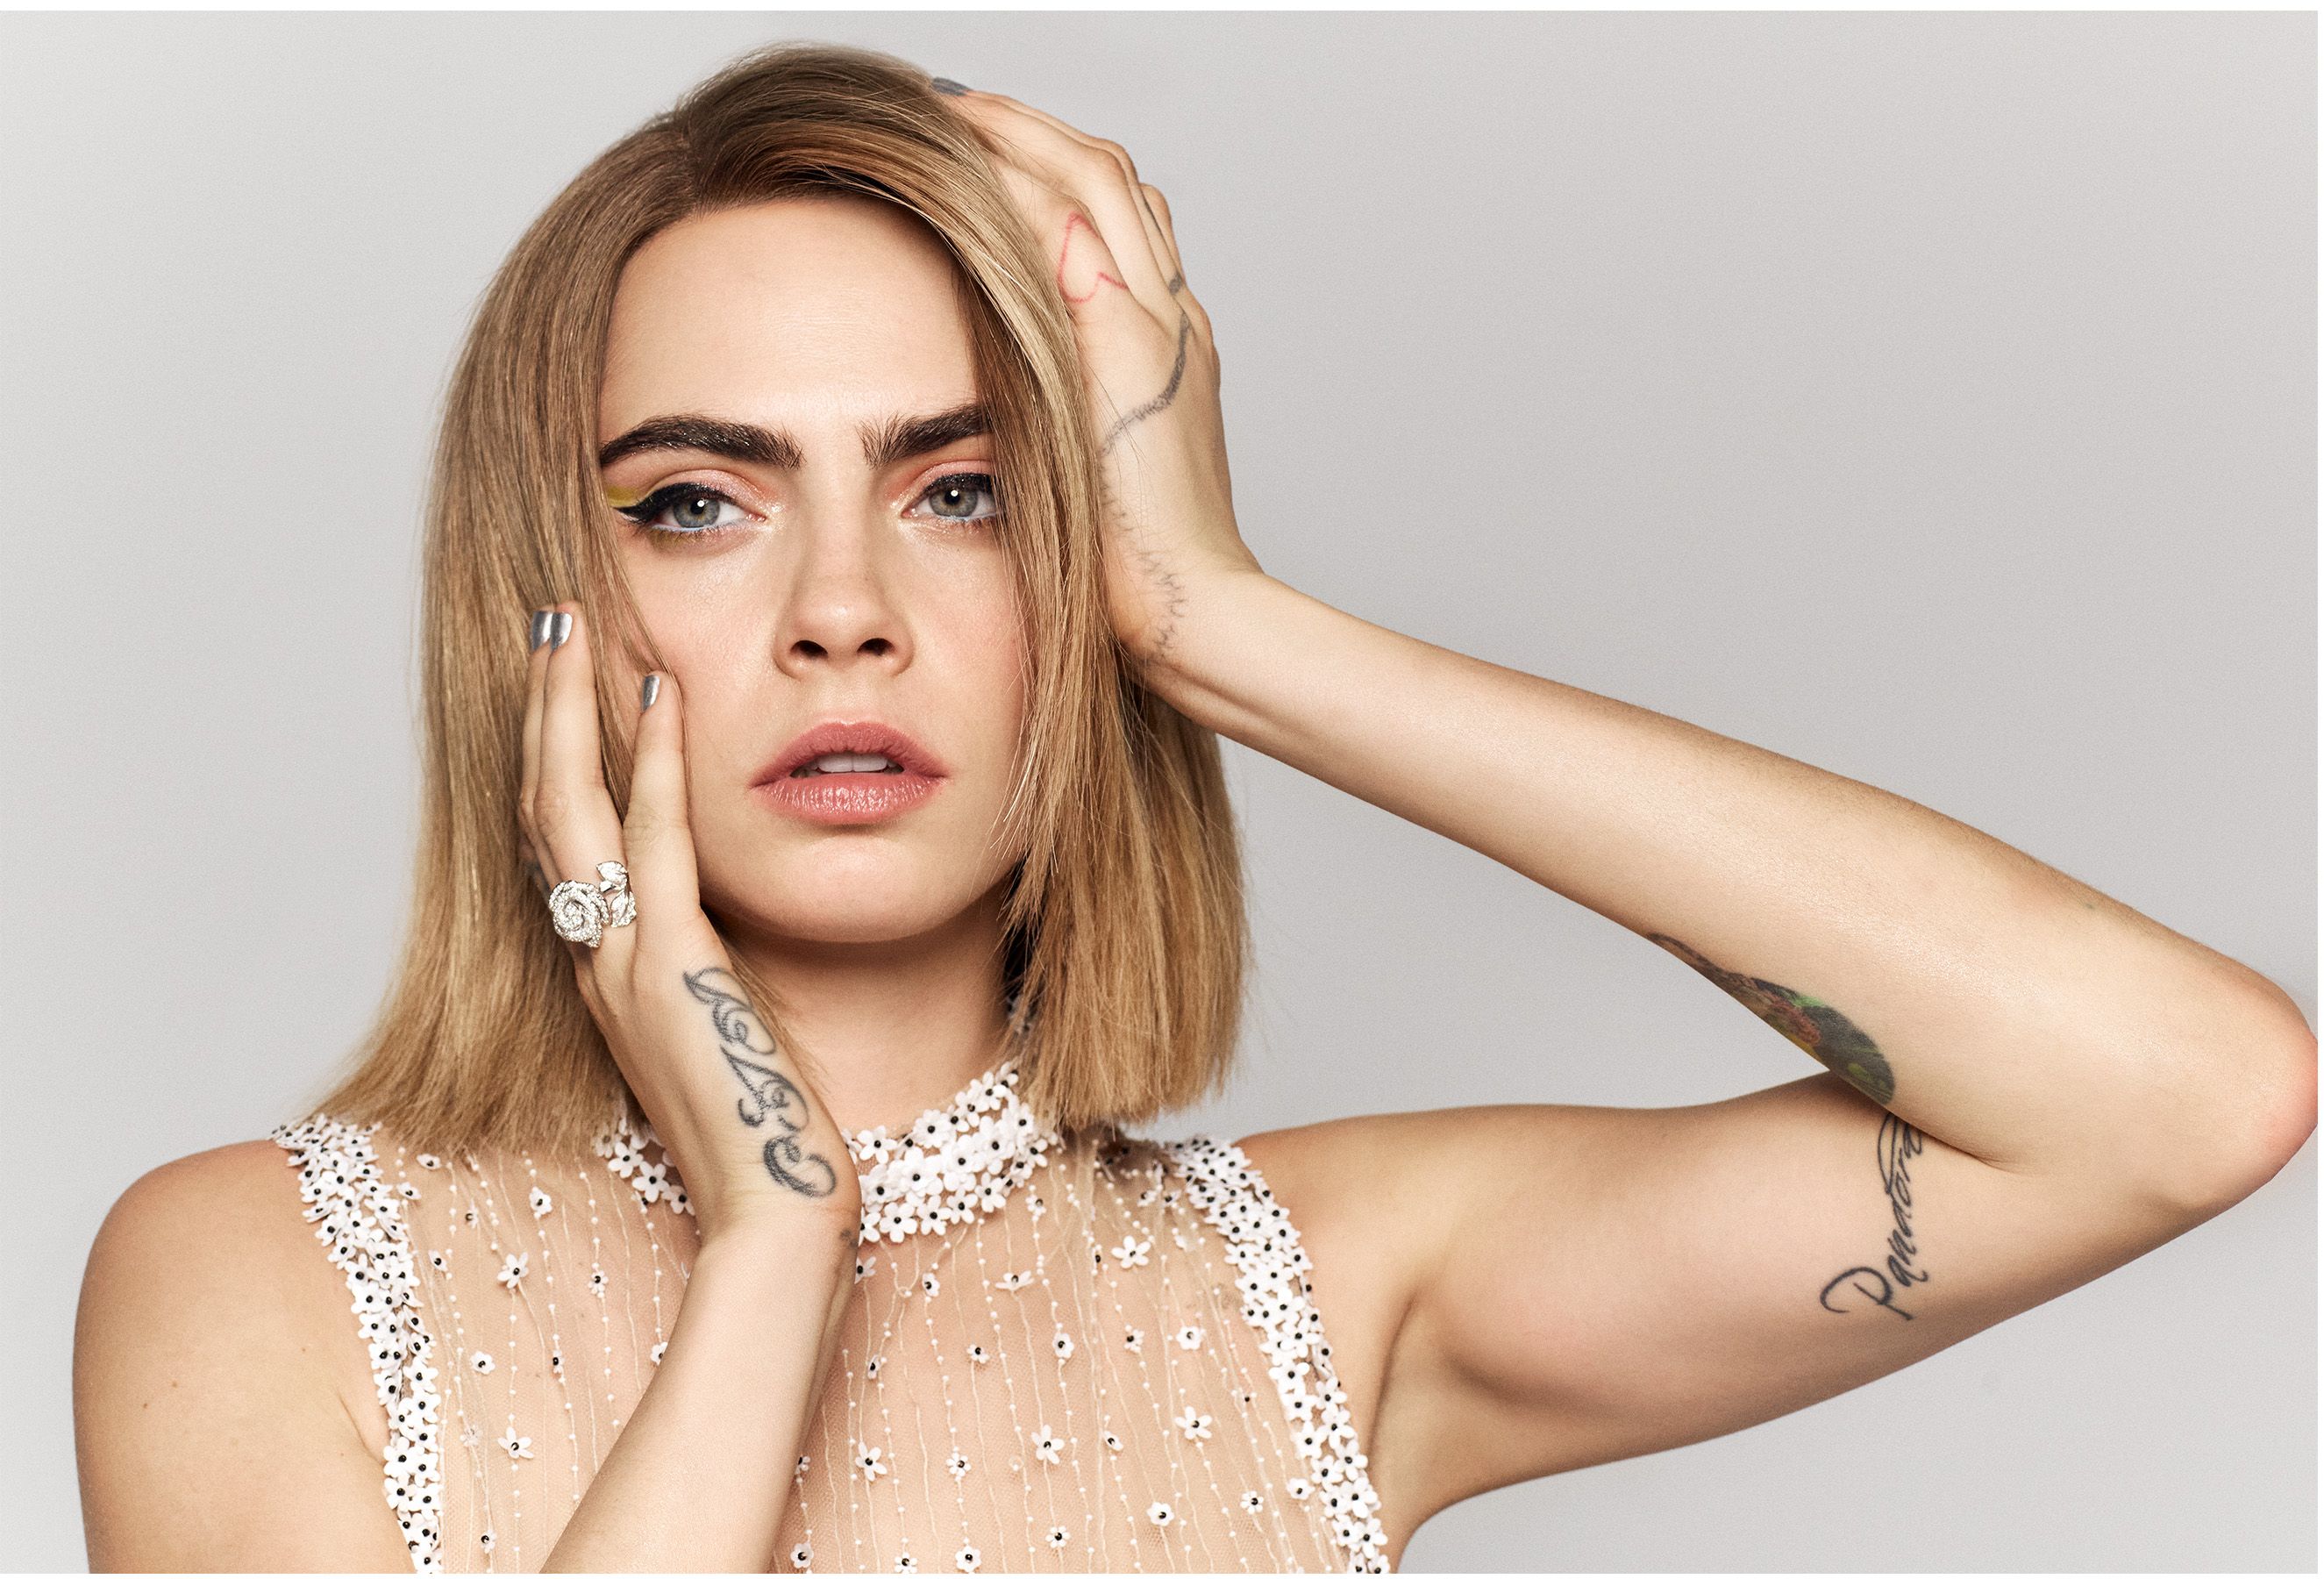 Cara Delevingne cover interview  Manifesting a baby and leading with  kindness